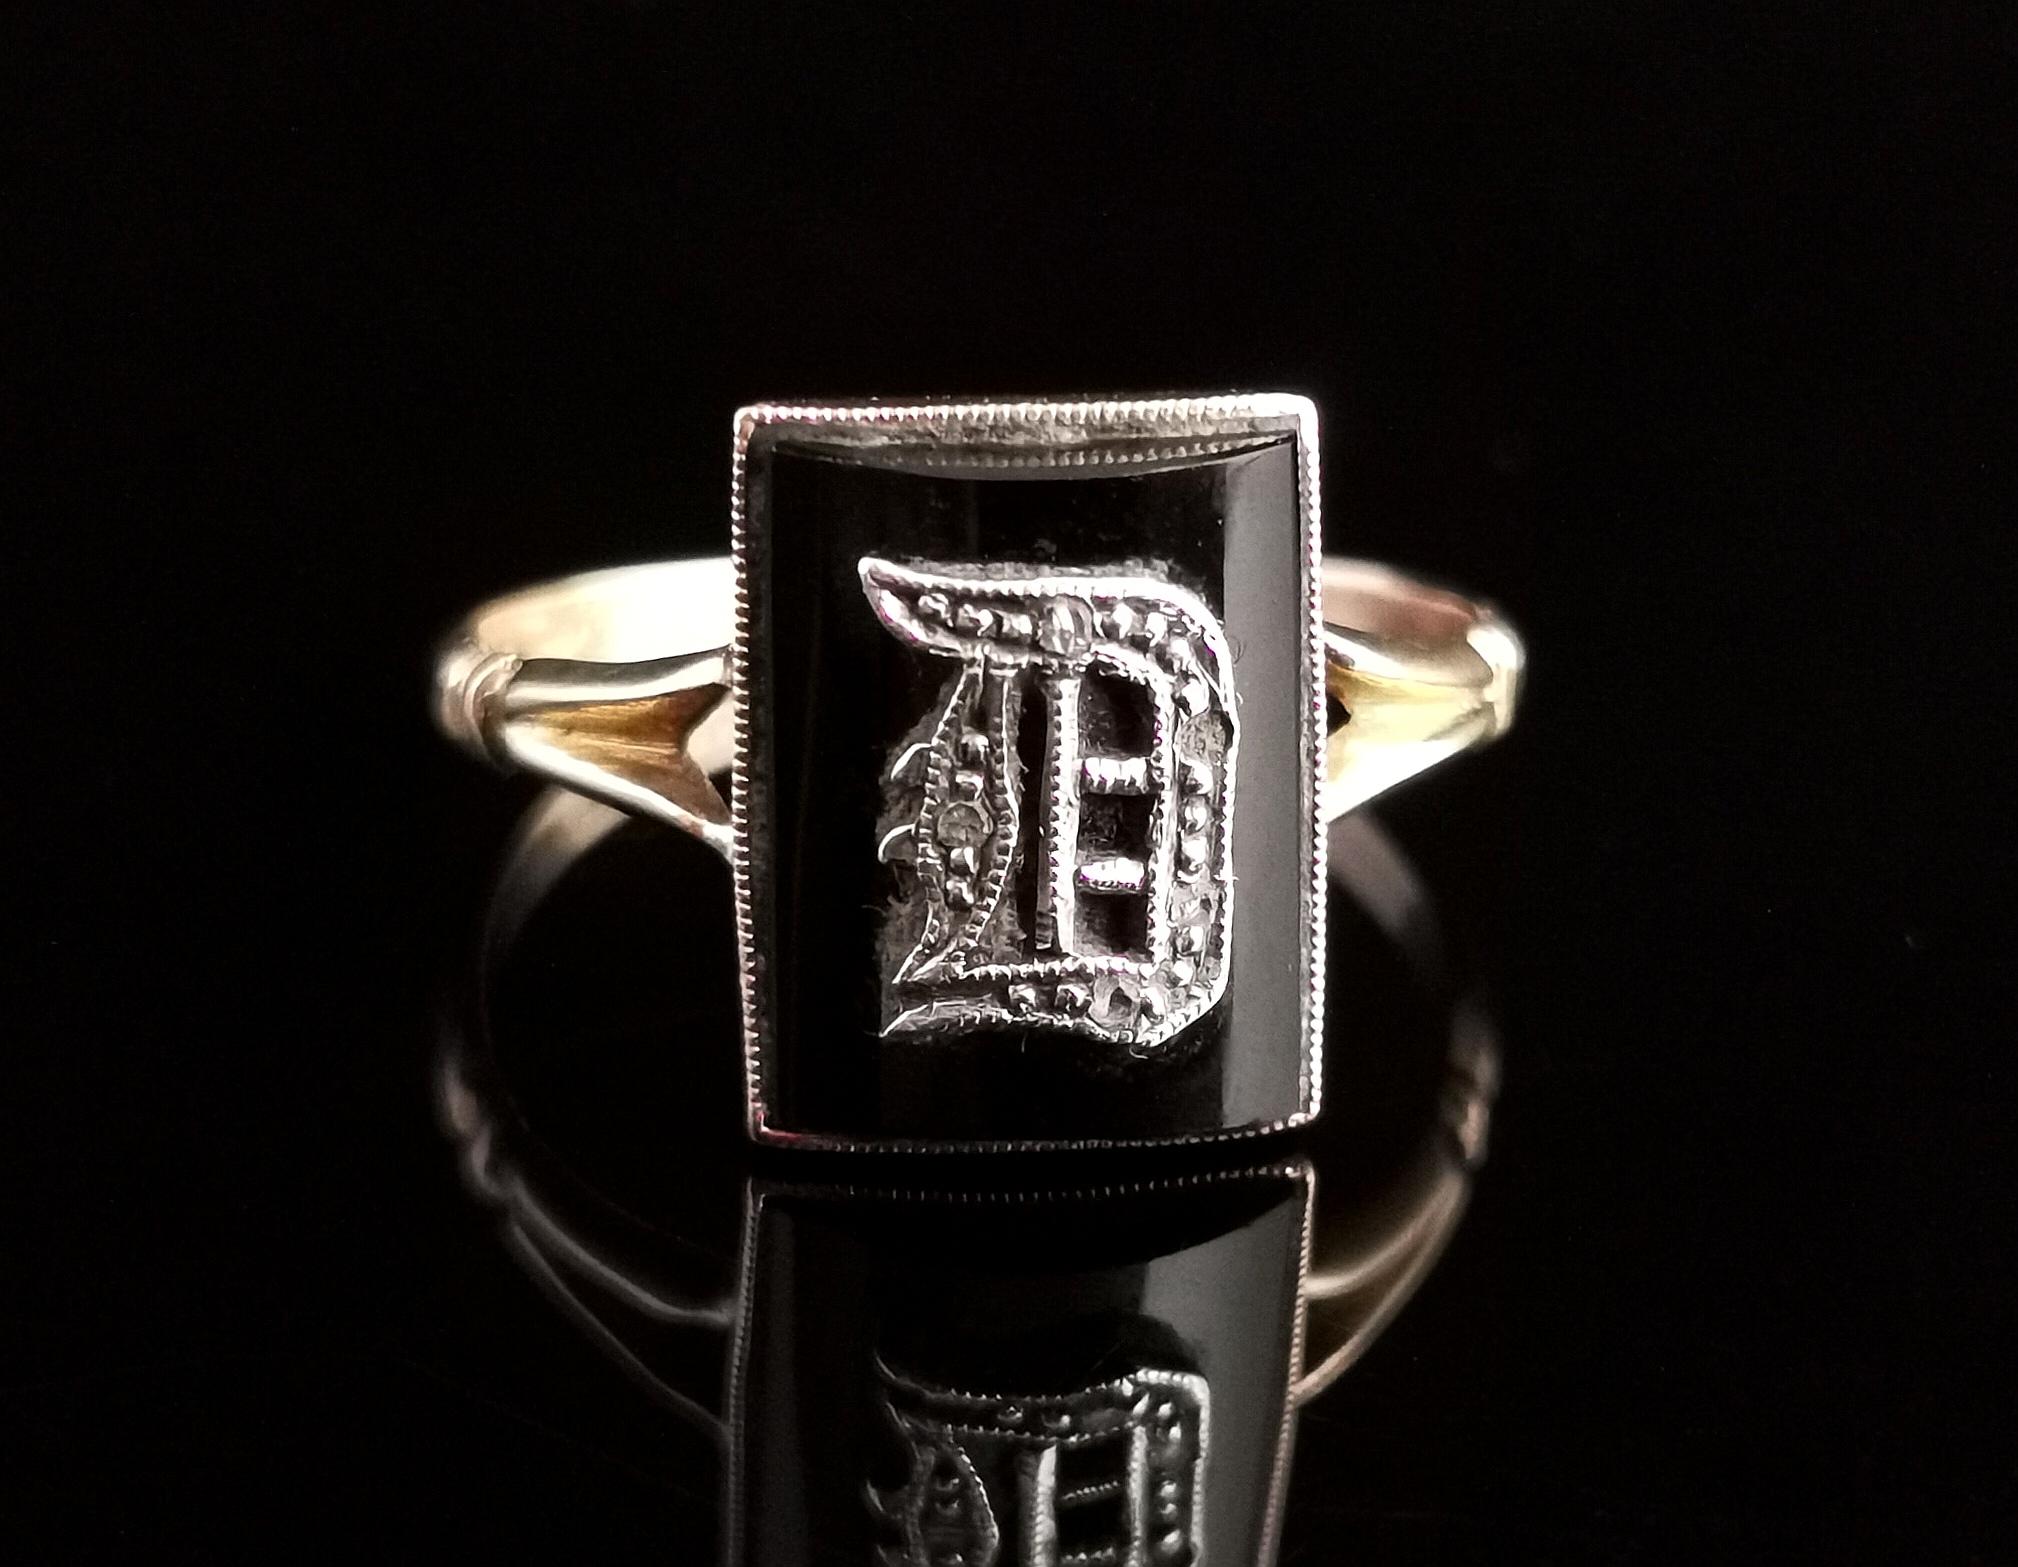 A gorgeous antique, late Victorian era mourning ring.

This is an initial ring with an applied silver letter D, lightly engraved in gothic script and set with Diamond chips, set on a rich black onyx panel.

The ring has decorative shaped shoulders